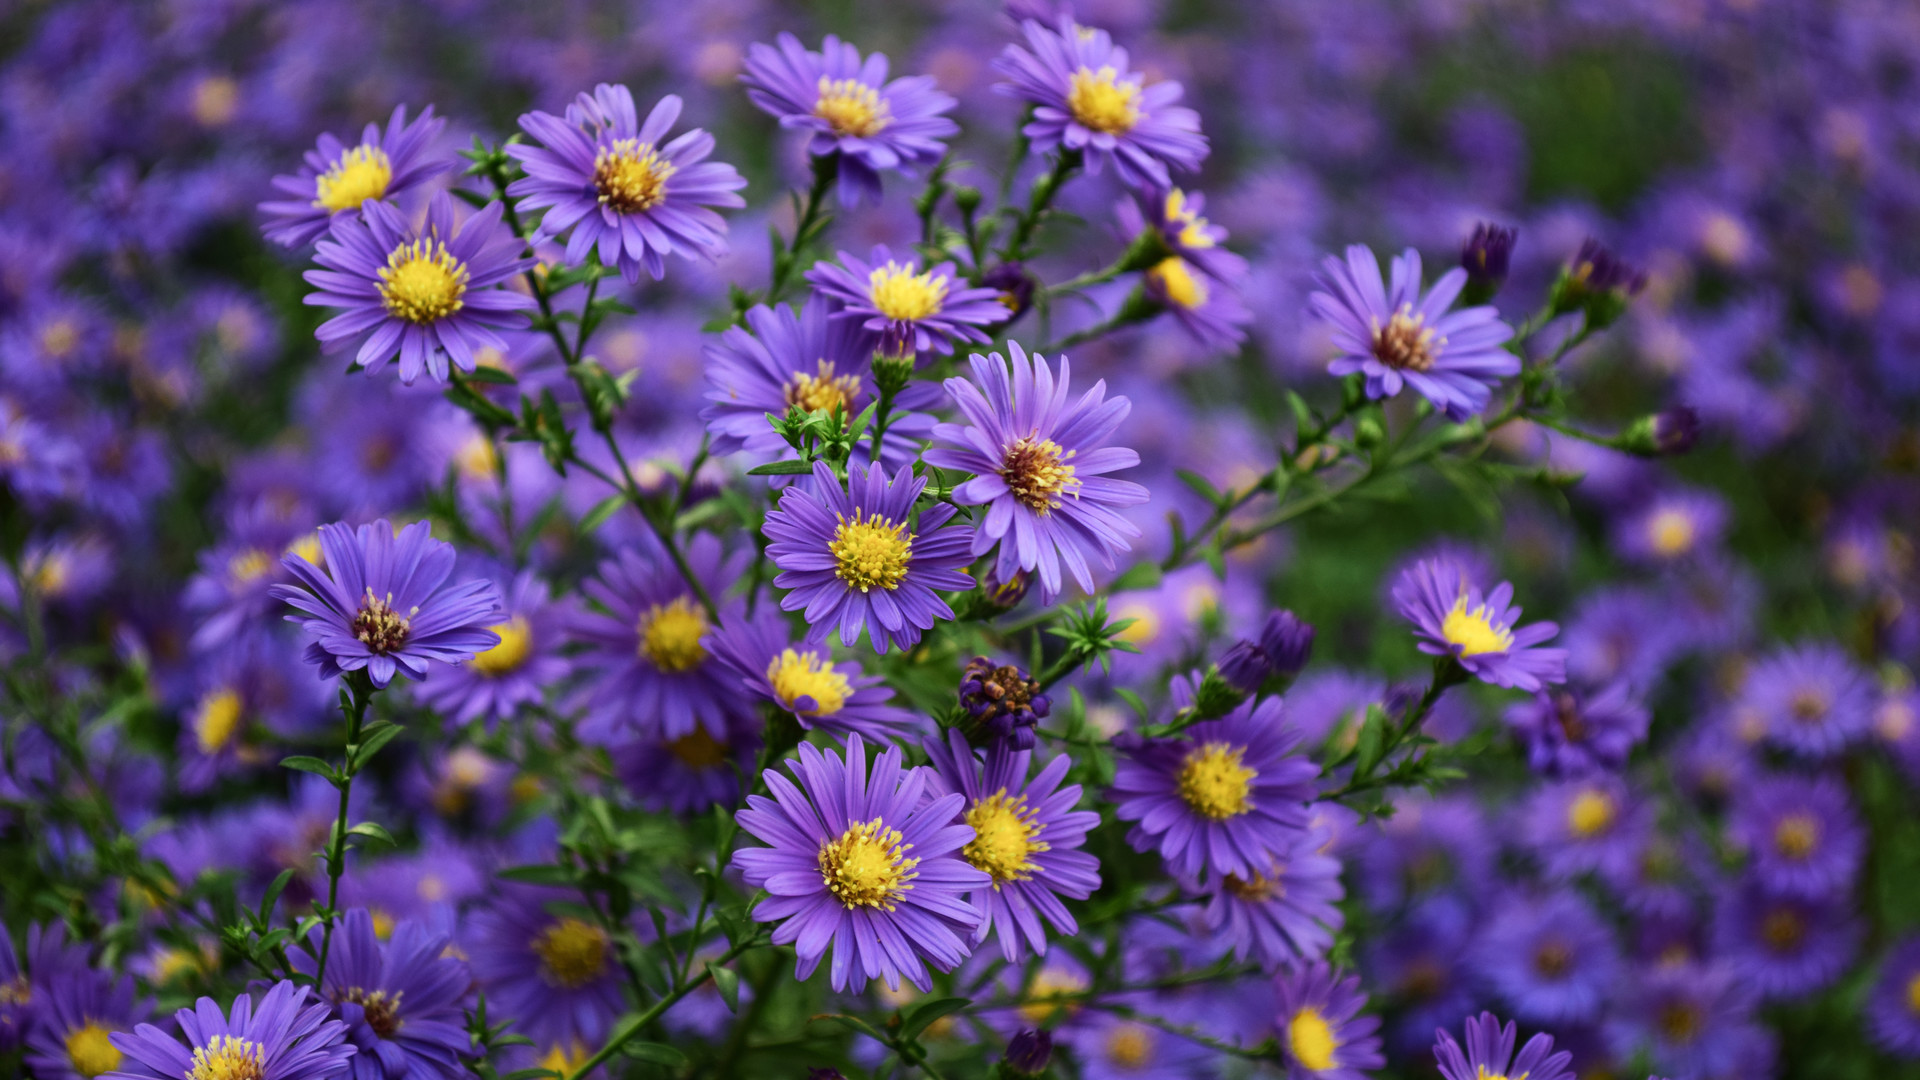 Asters Purple Yellow Flowers Ornamental Plants From Family ...